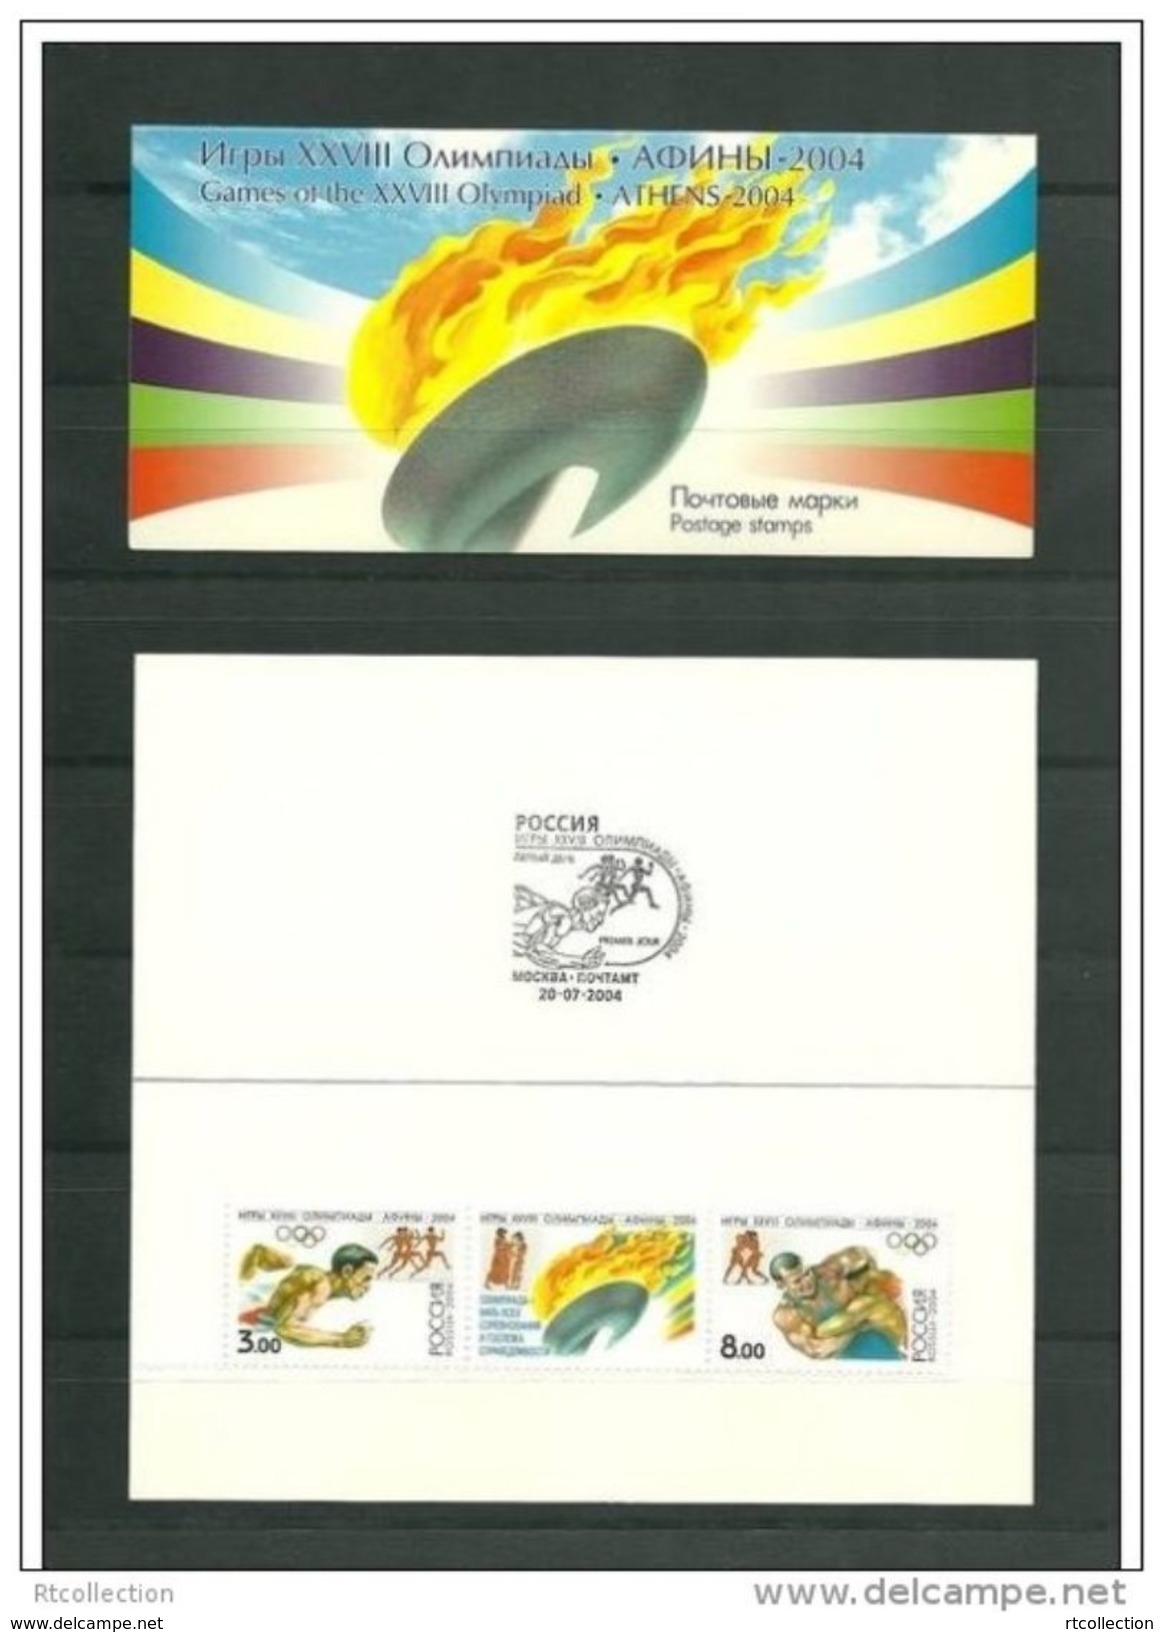 Russia 2004 Booklet Summer Olympic Game Athens Sports Running Wrestling Olympiad Flame Greek Poem Art Stamps Mi 1190-91 - Weightlifting